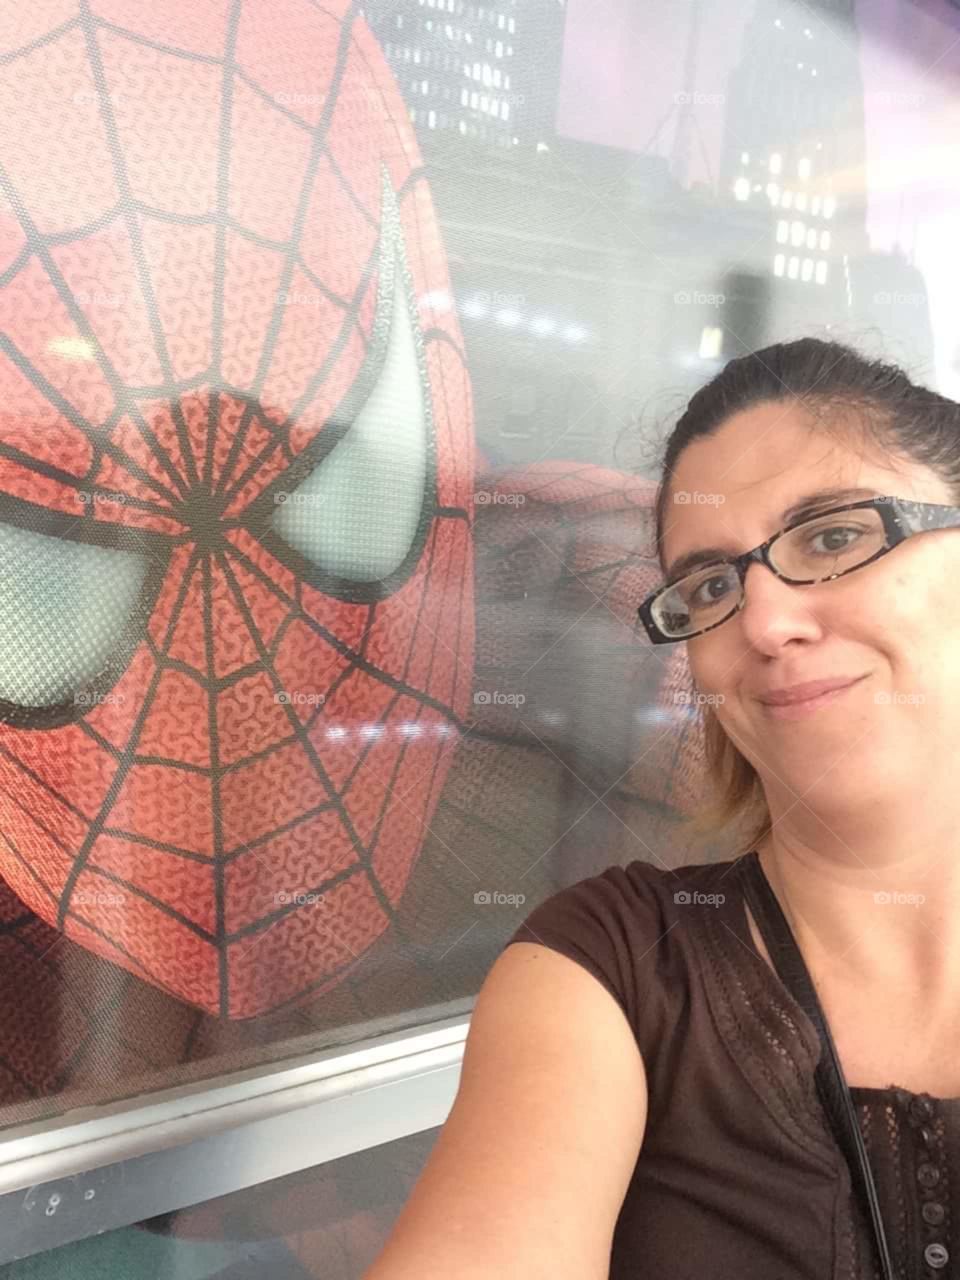 Hanging out with a hero....who doesn't want to be like Spider-Man being a hero stay positive 